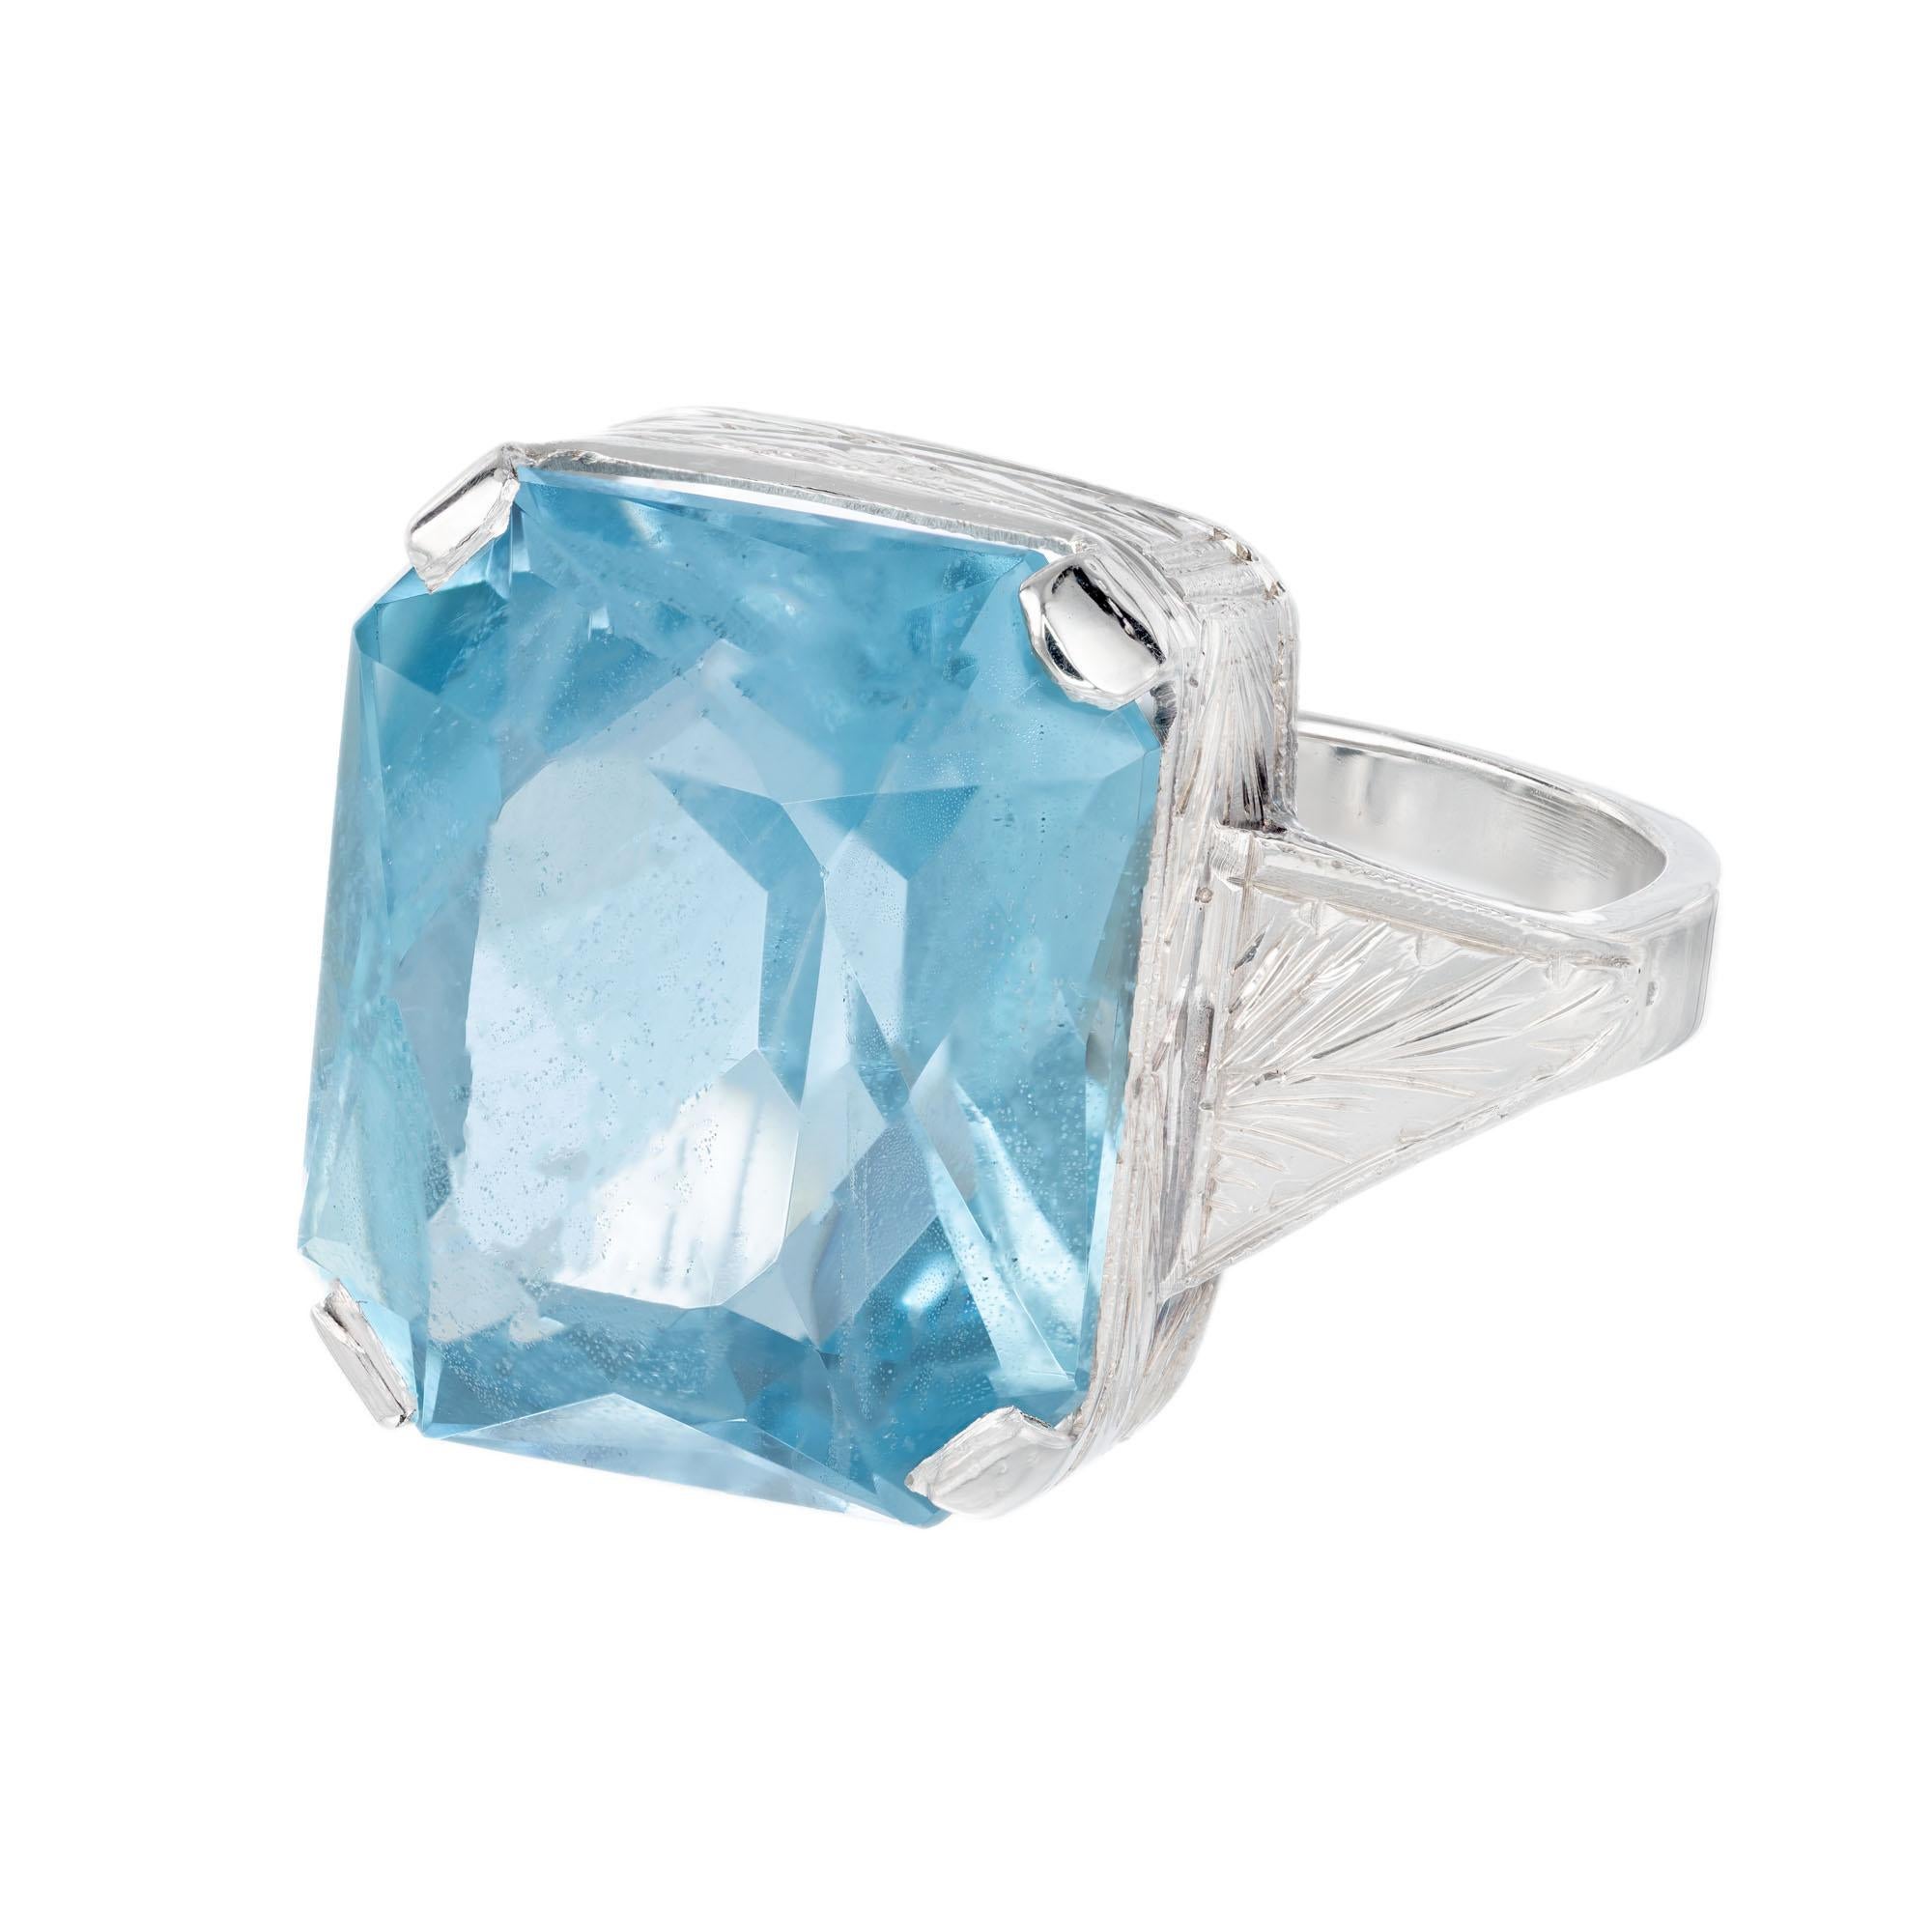 8.75 Carat Emerald Cut Natural Aqua White Gold Art Deco Cocktail Ring In Good Condition For Sale In Stamford, CT